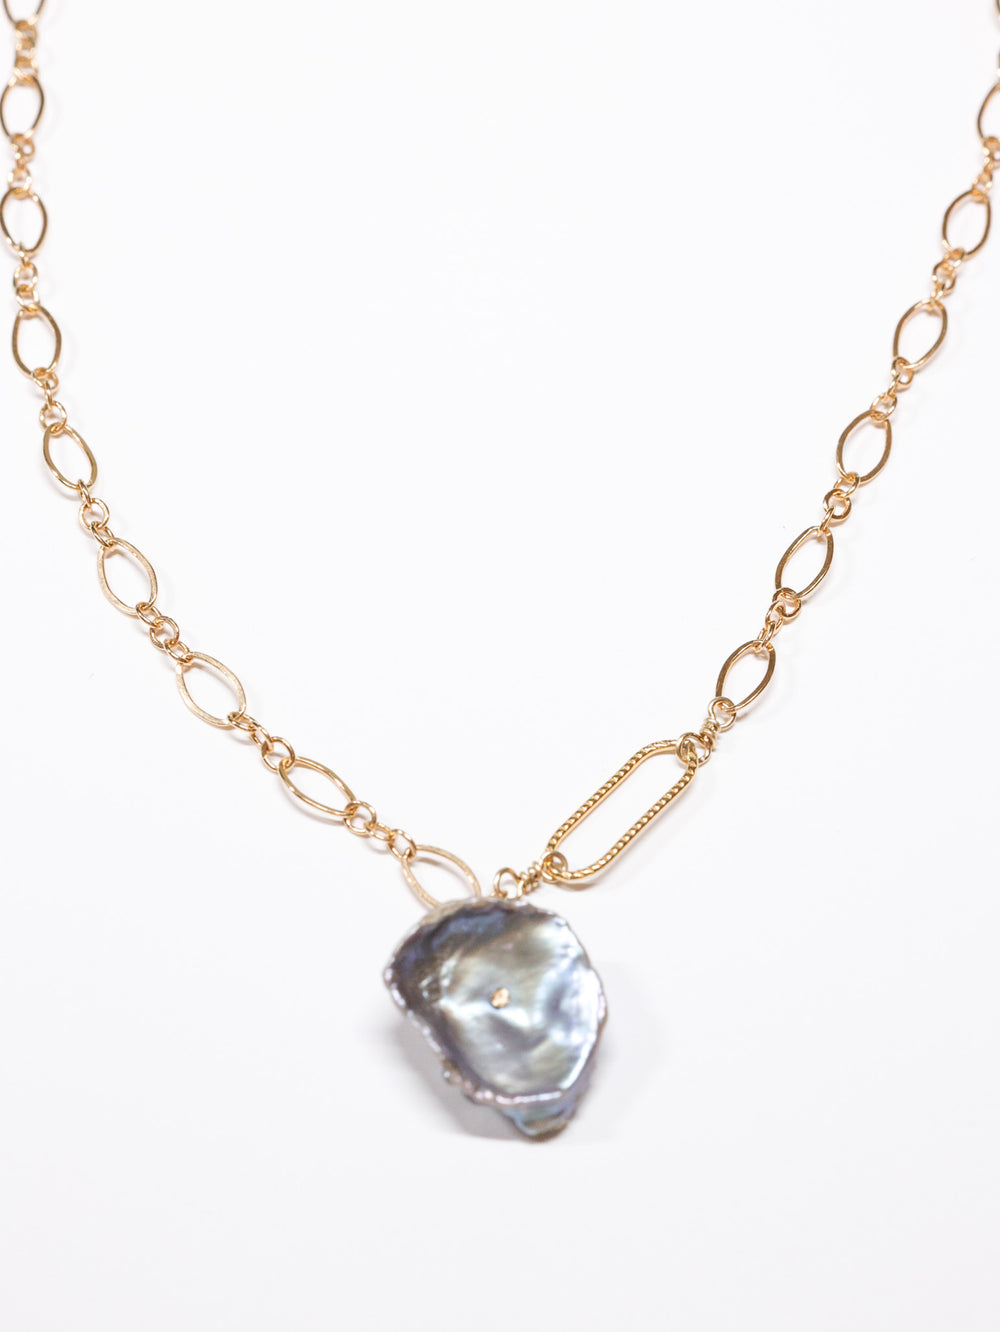 Grey Peacock Keshi freshwater pearl nh necklace -gold filled